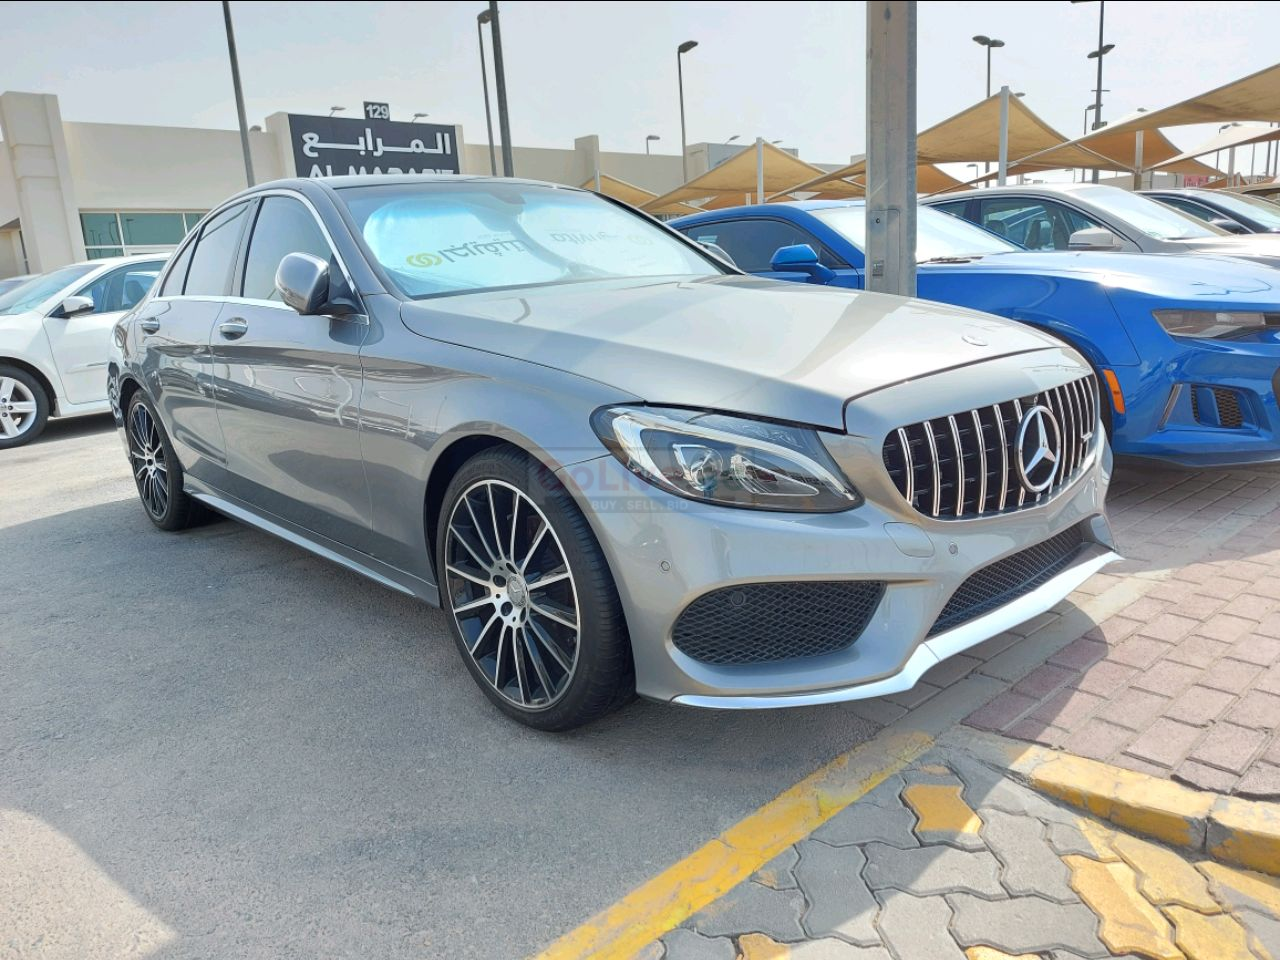 Mercedes Benz C-Class 2016 AED 95,000, Good condition, Full Option, Sunroof, Lady Use, Navigation System, Fog Lights, Negotiable,